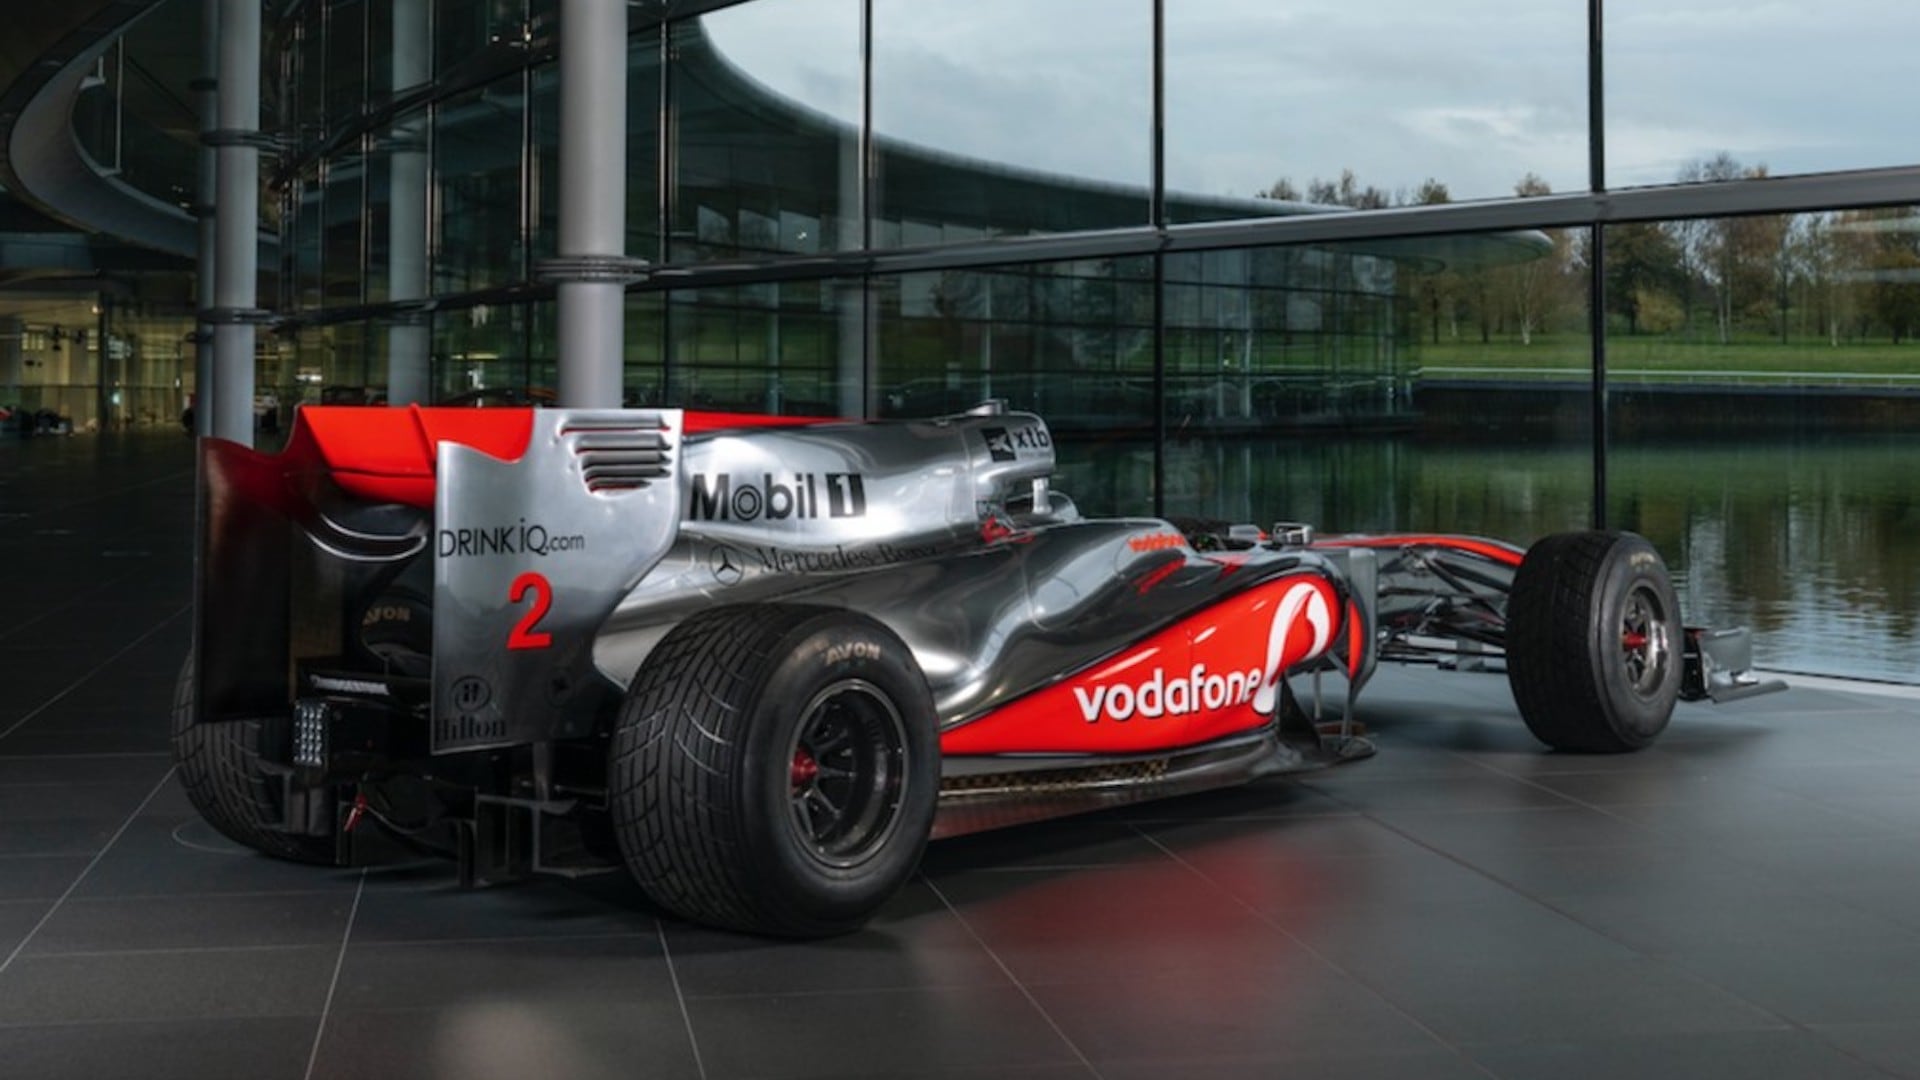 Lewis Hamilton McLaren F1 car sells for nearly £5m - Motoring Research